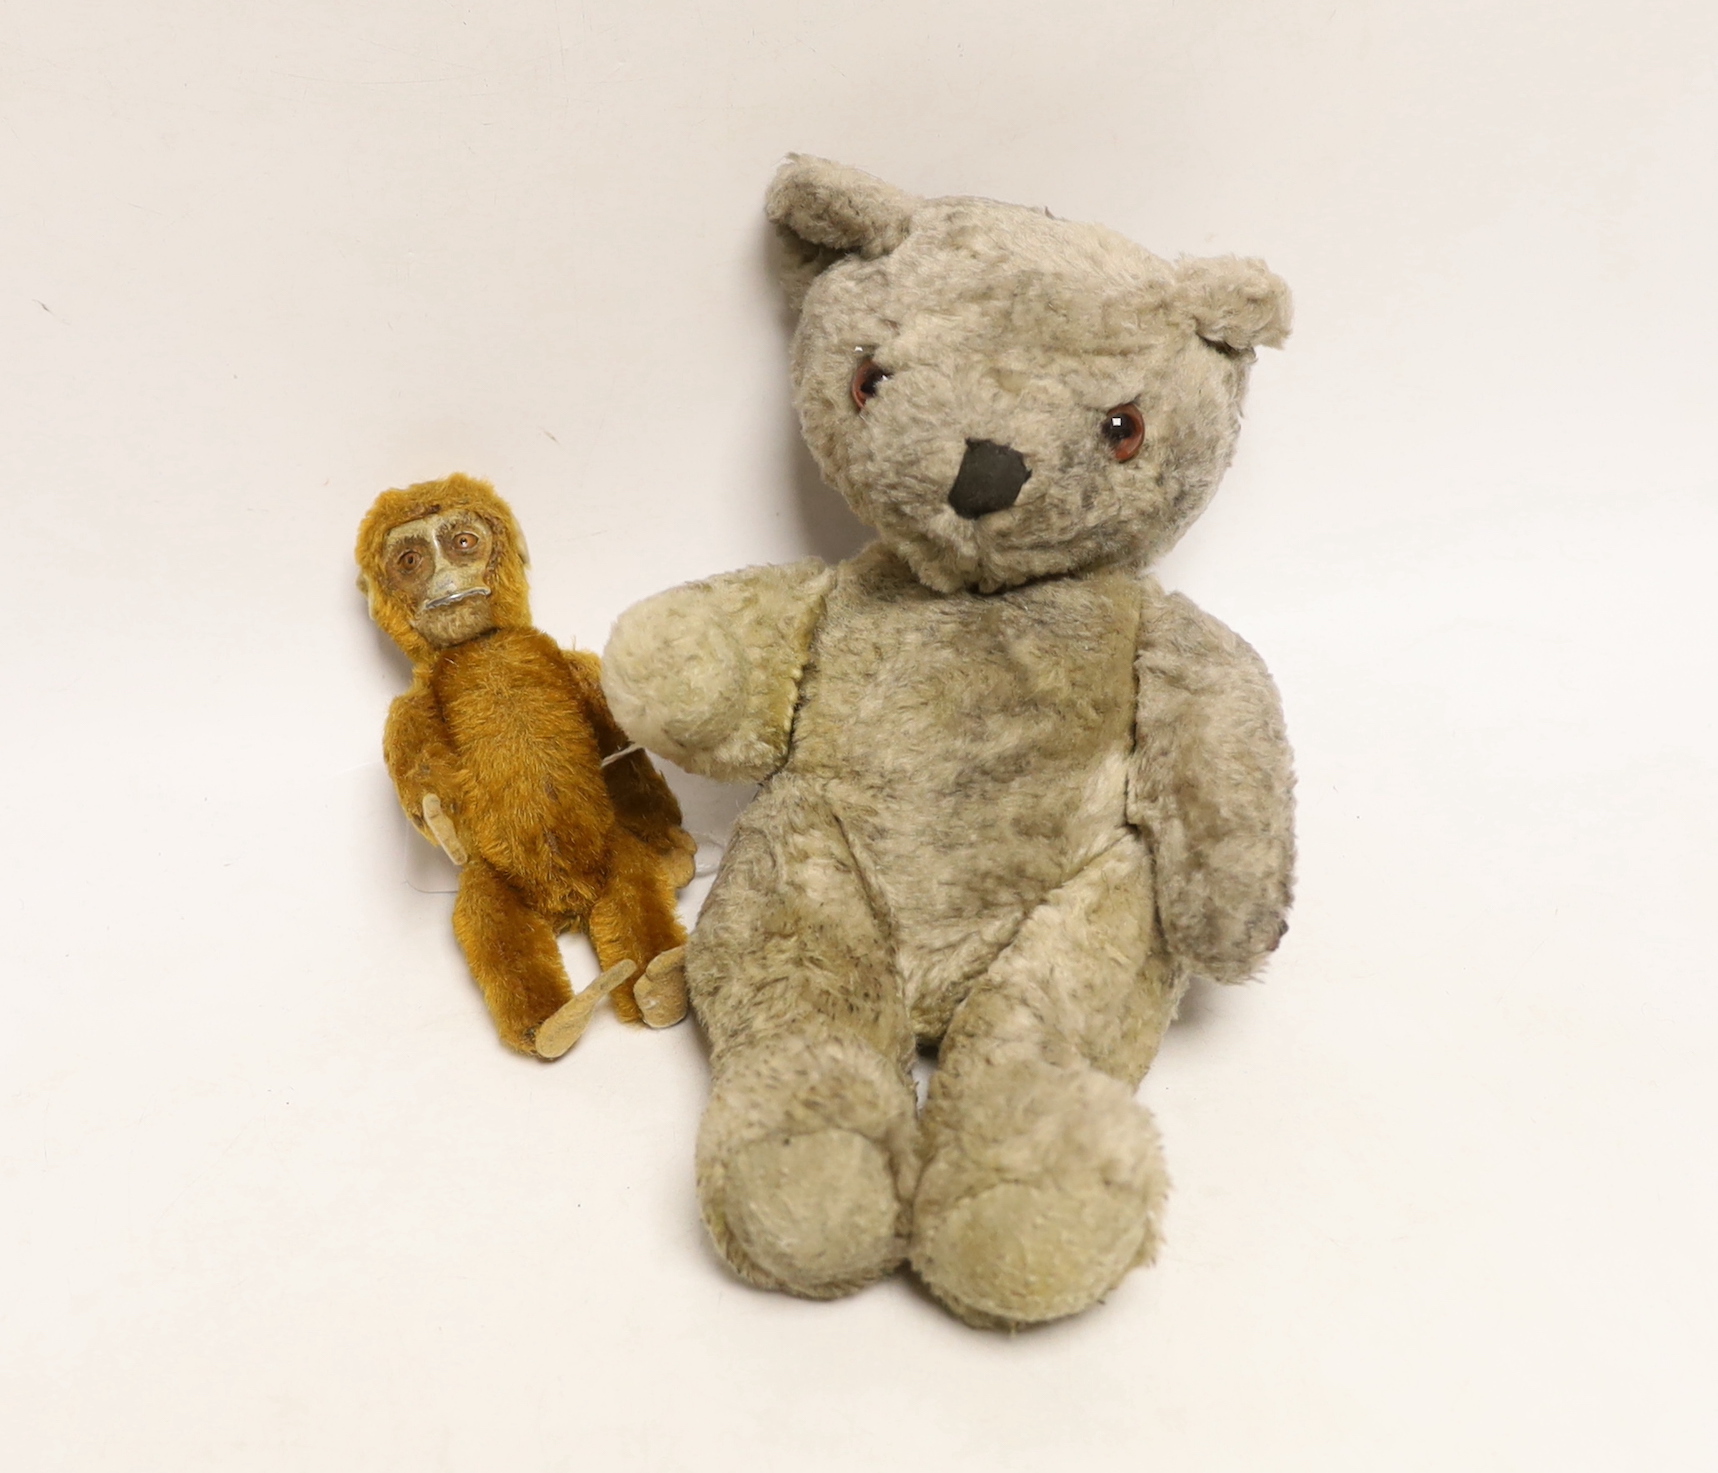 A Schuco vintage perfume bottle in the form of a Monkey and another novelty teddy bear perfume bottle, largest 22cm in length